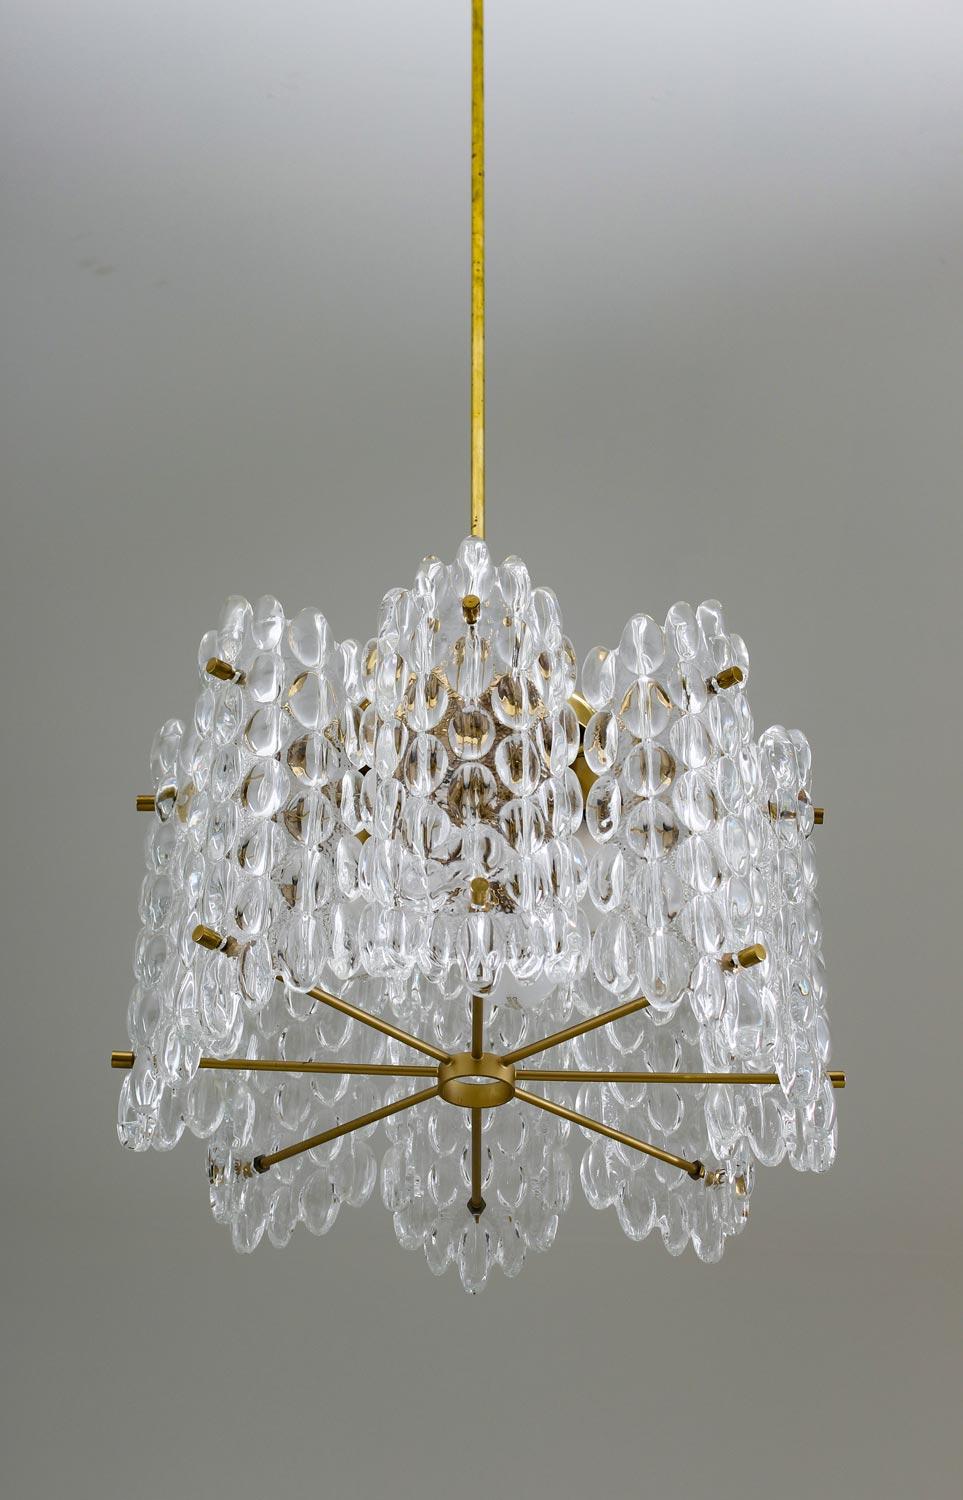 Pair of Swedish Midcentury Chandeliers by Carl Fagerlund for Orrefors 1